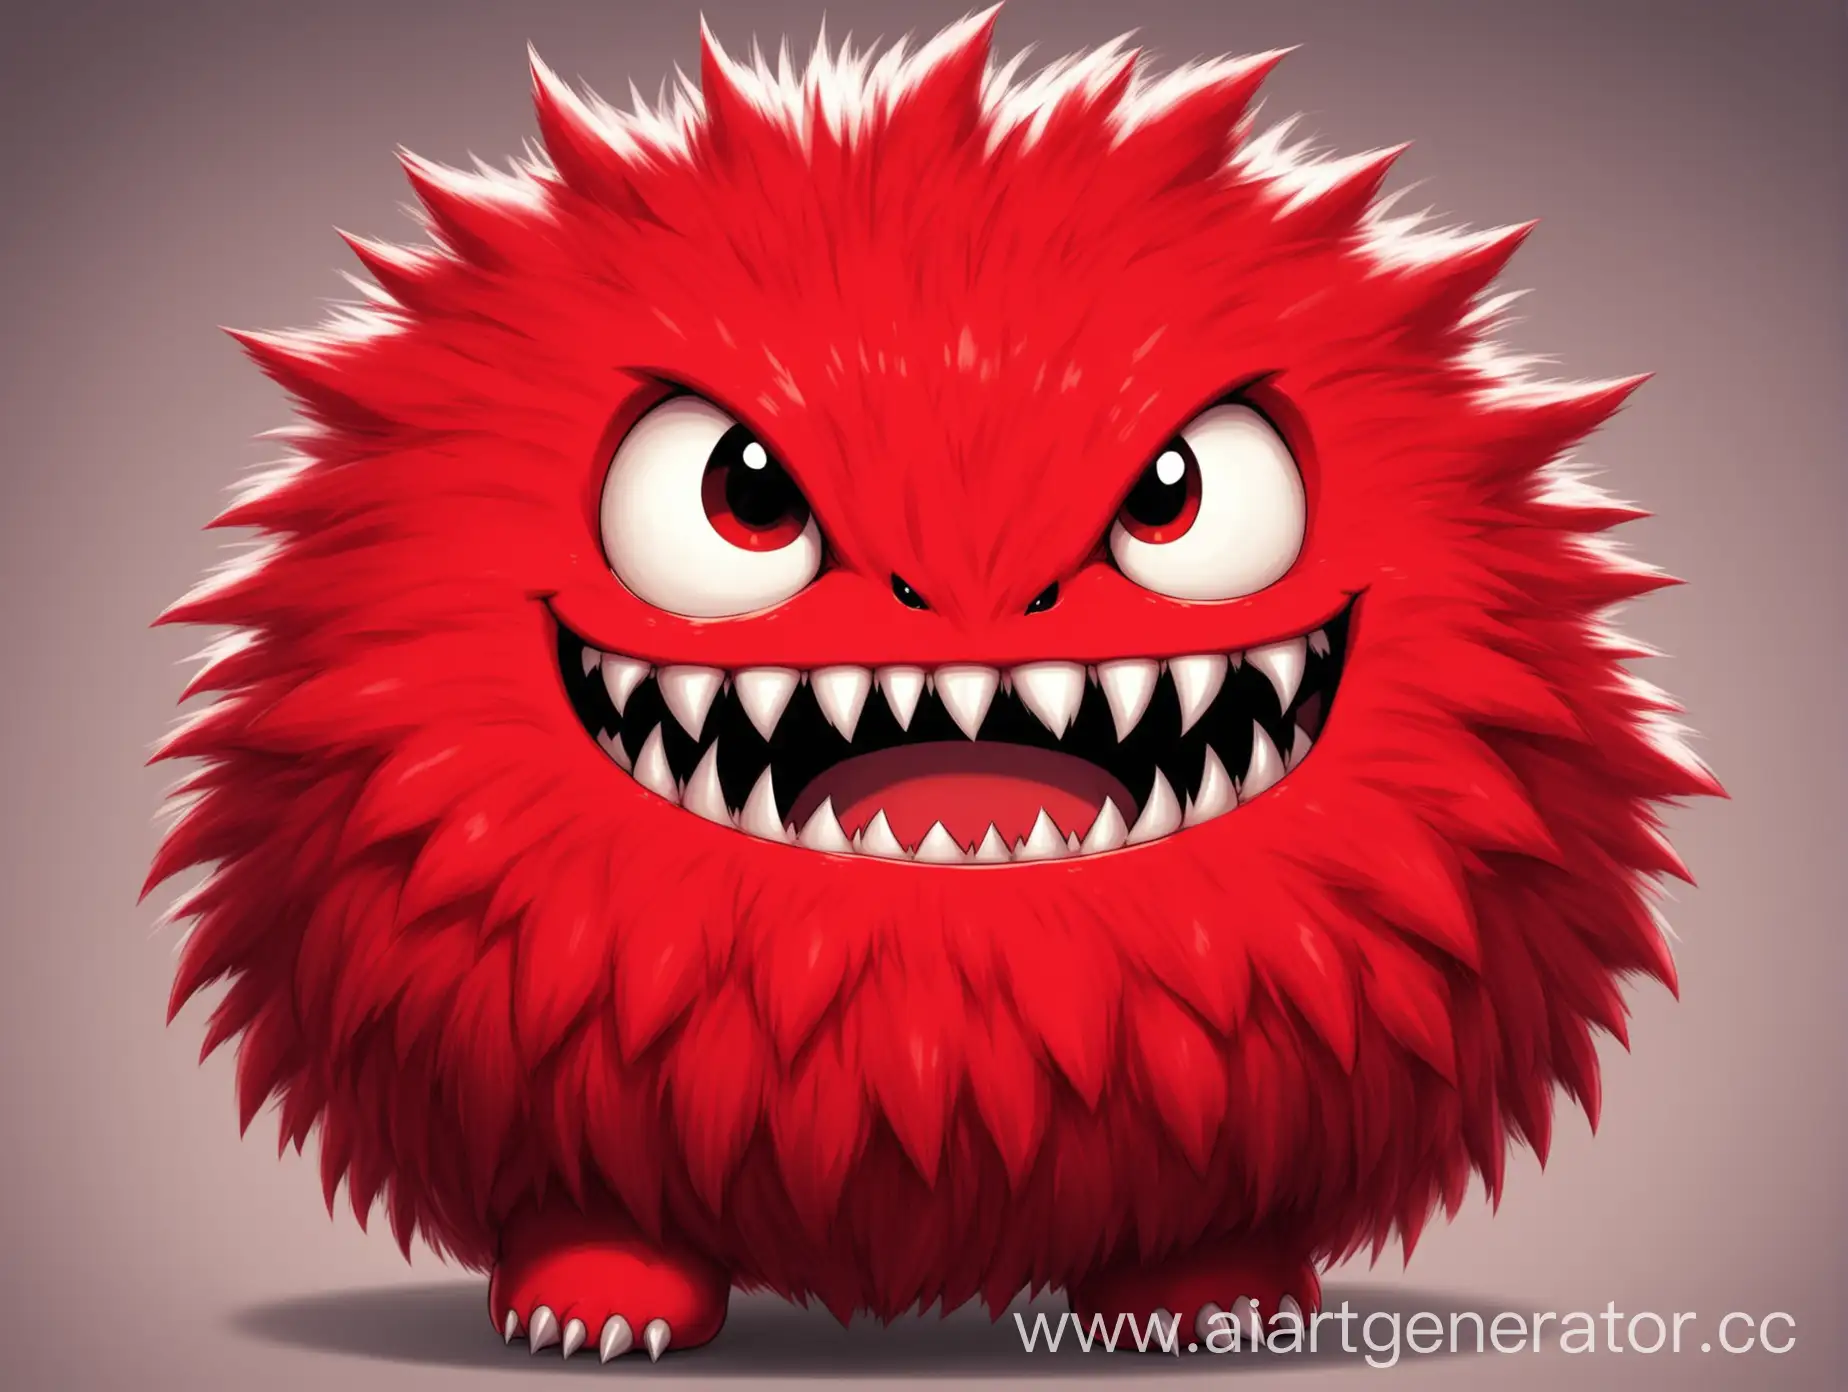 Adorable-Red-Fluffy-Monster-with-Sharp-Teeth-and-a-Playful-Smile